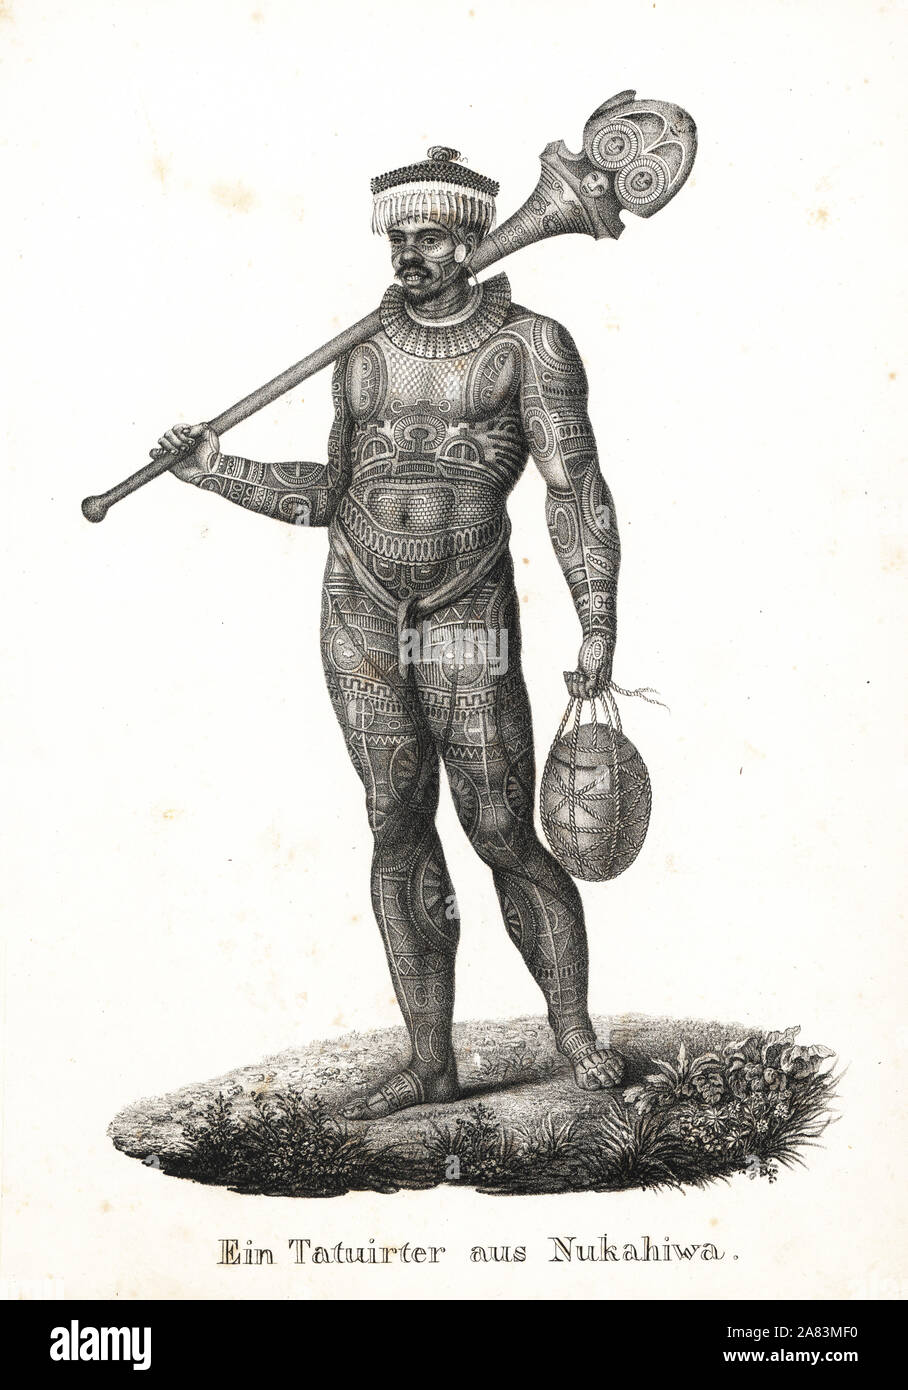 Tattooed warrior of Nuka Hiva, Marquesas Islands (Nukahiwa). In headdress and loincloth, full body tattoos, holding a large mace. Copied from Wilhelm Gottlieb Tilesius von Tilenau. Lithograph by Karl Joseph Brodtmann from Heinrich Rudolf Schinz's Illustrated Natural History of Men and Animals, 1836. Stock Photo